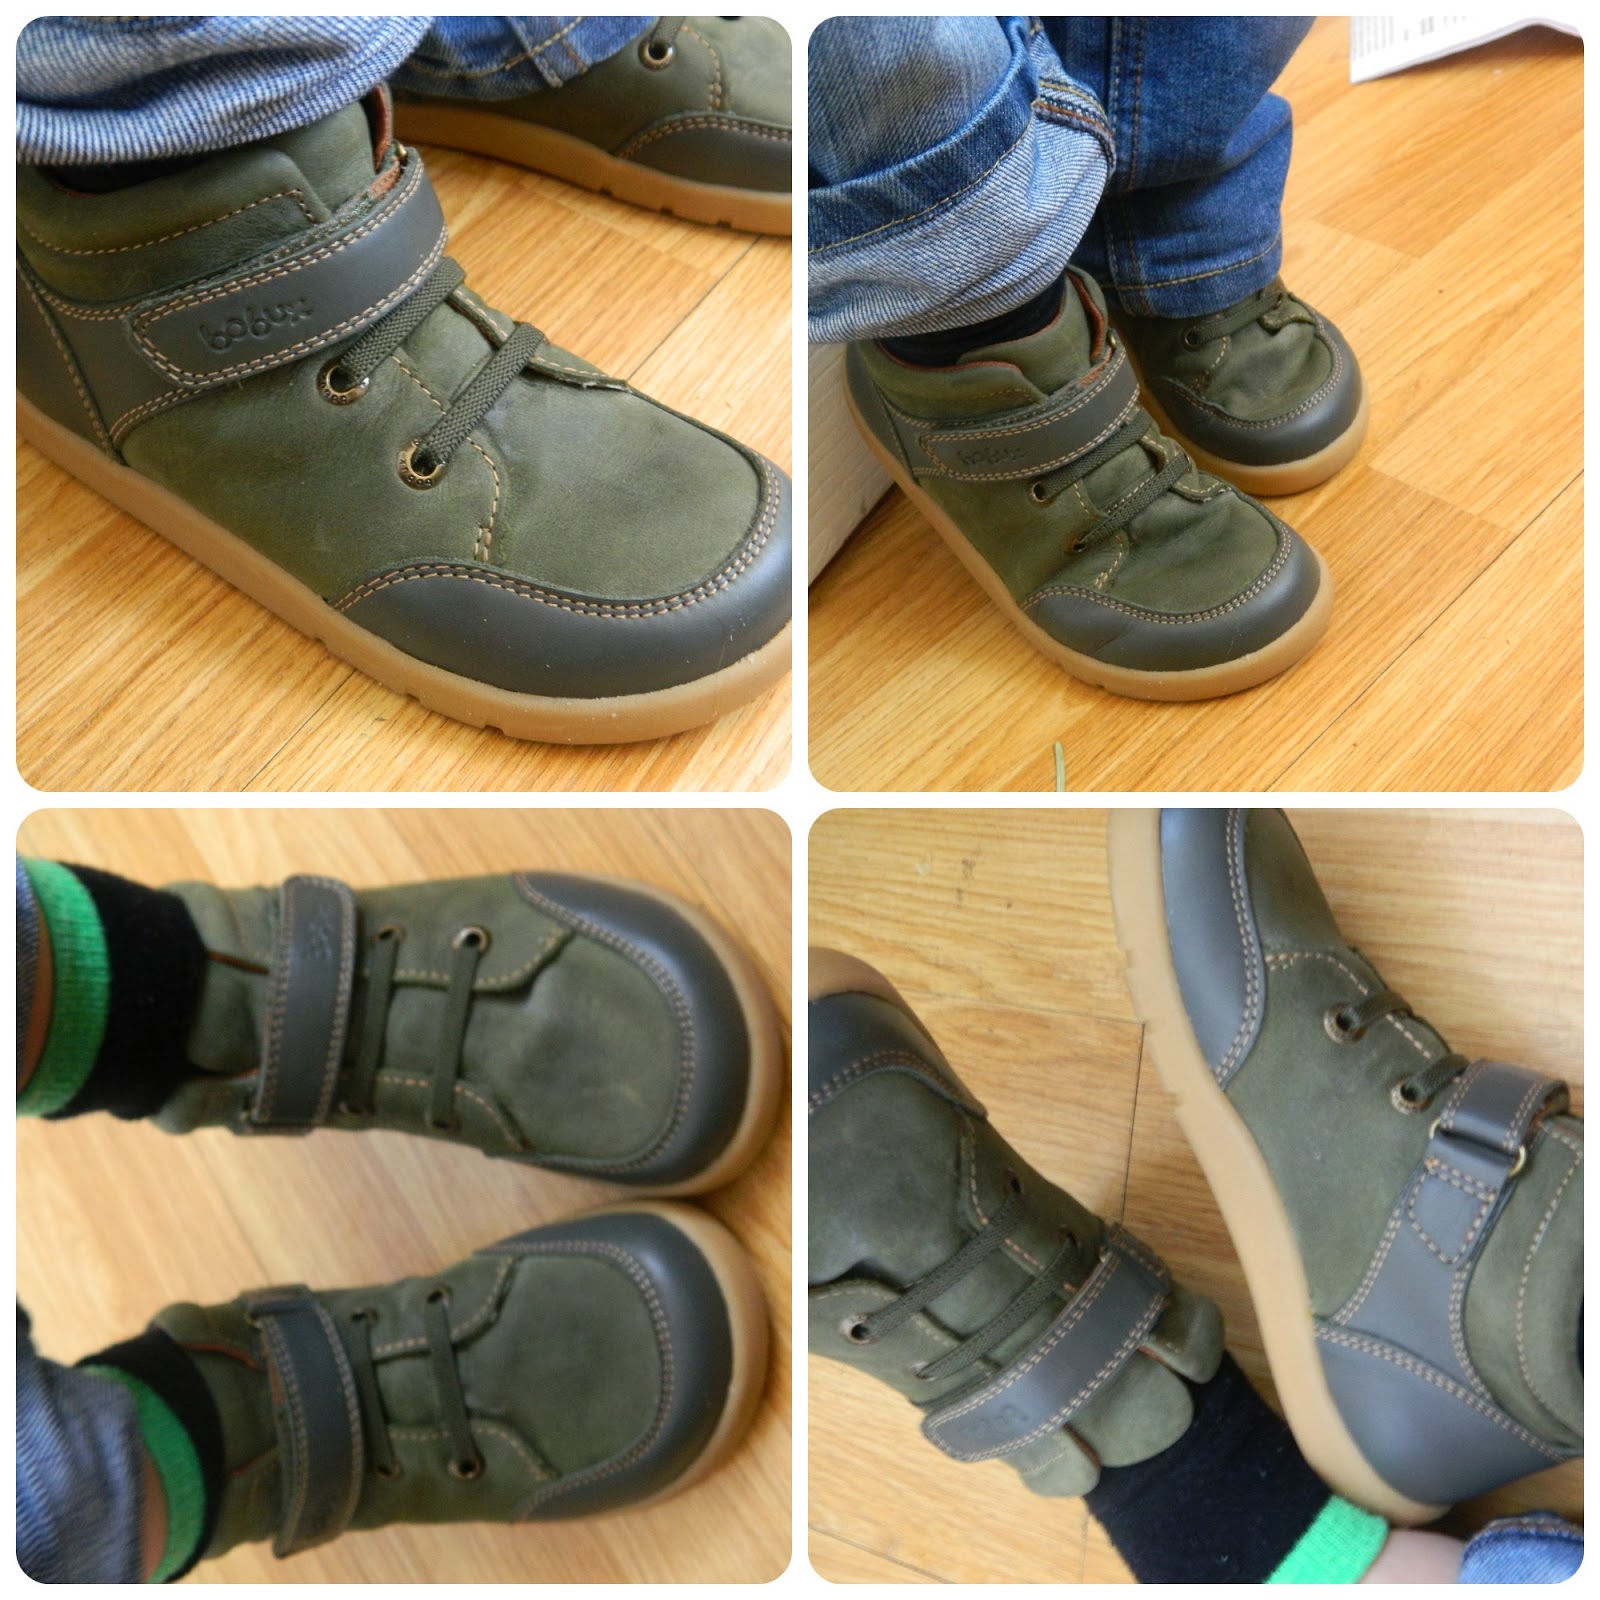 New Shoes for Bud, from Bobux - A Review | Red Rose Mummy